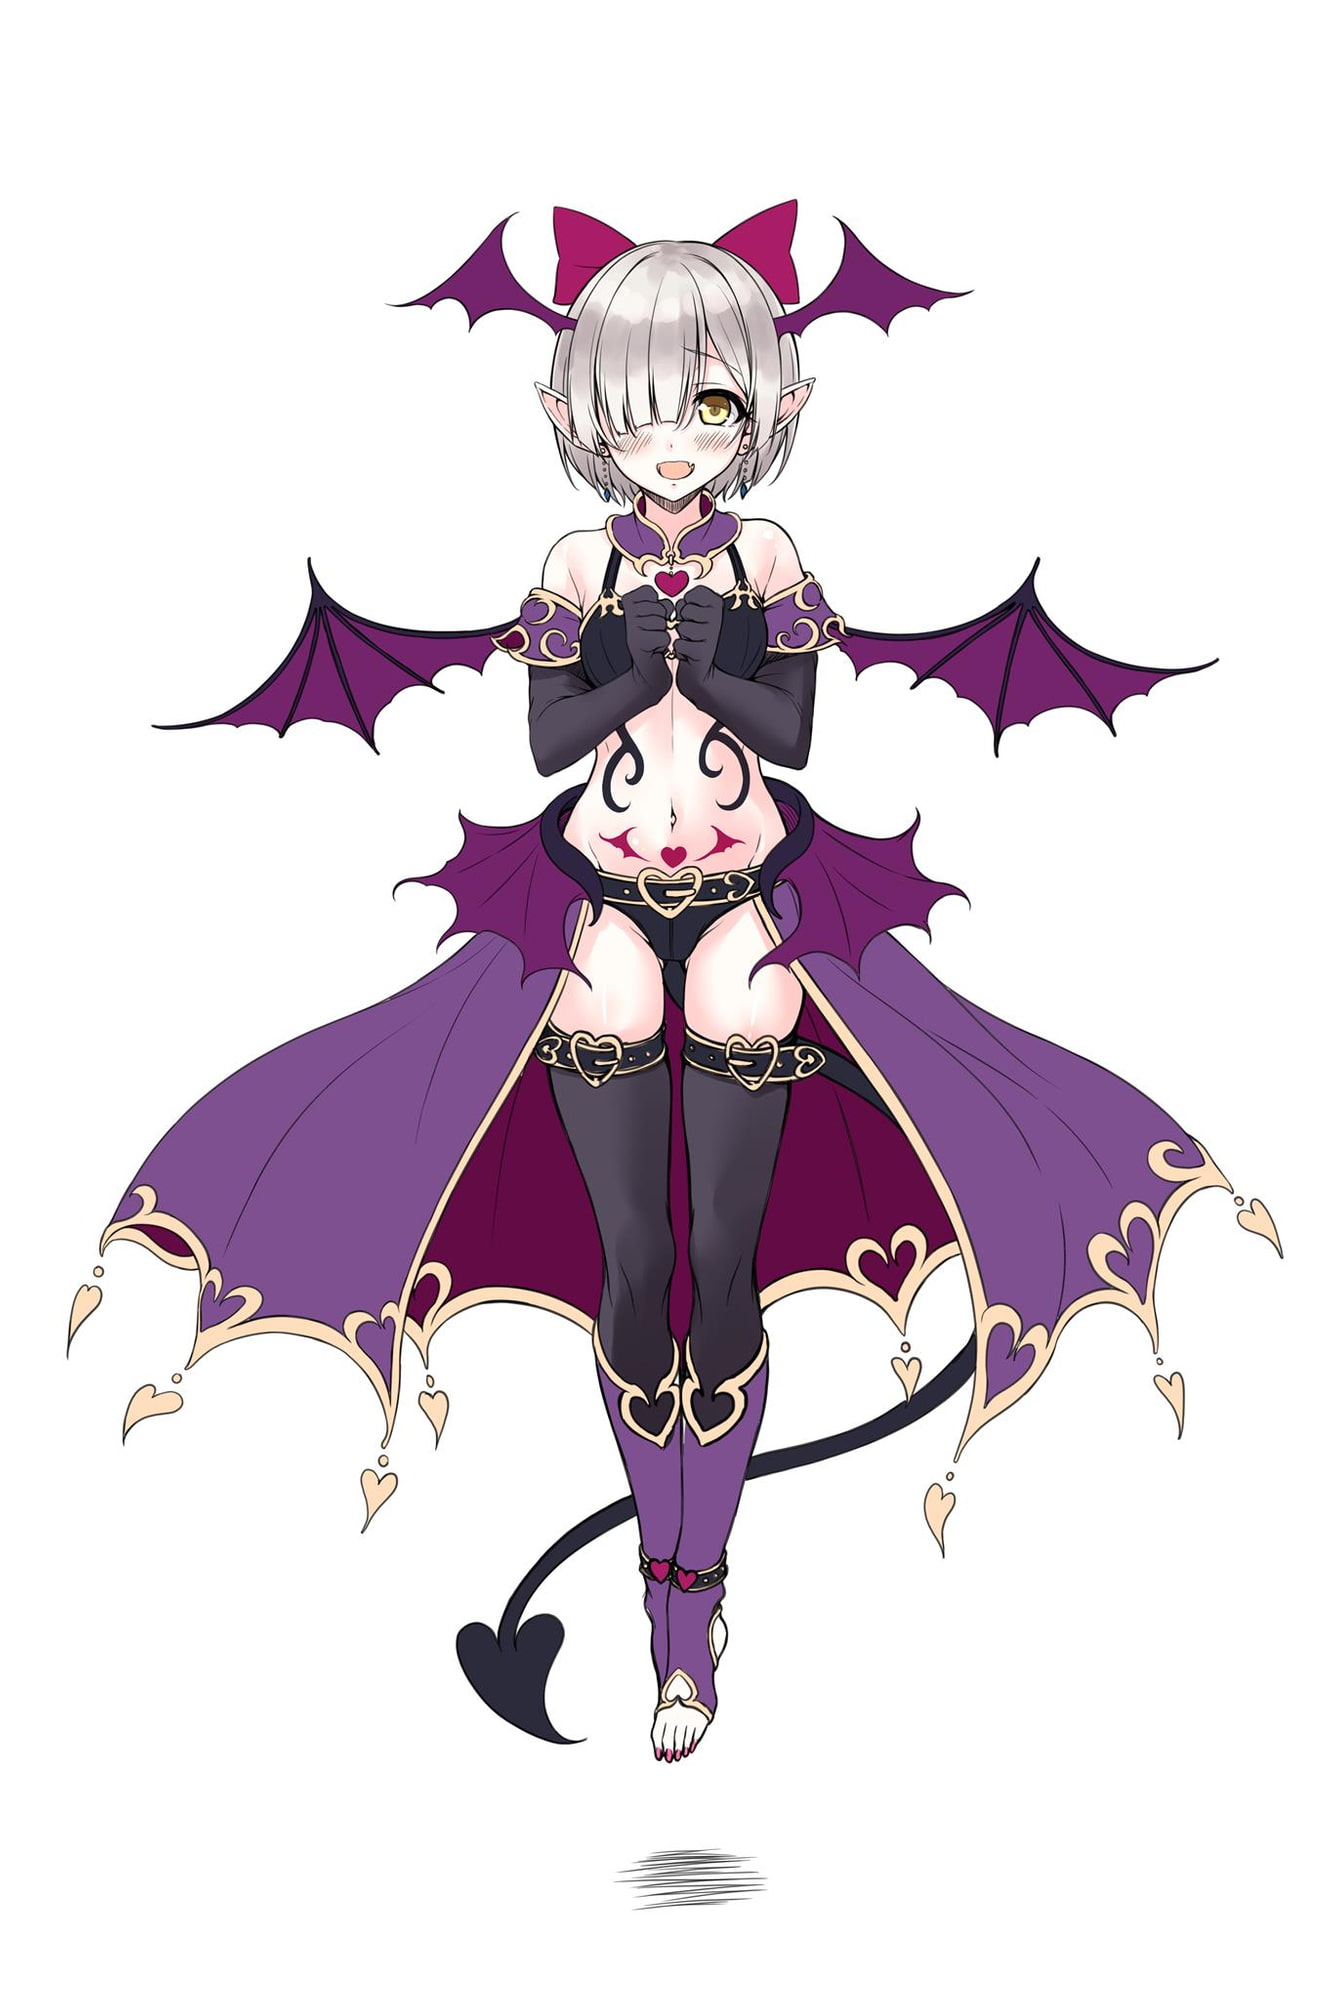 [H with Monster Girl] Summon Spell Deliheal - Succubus "Lielith"